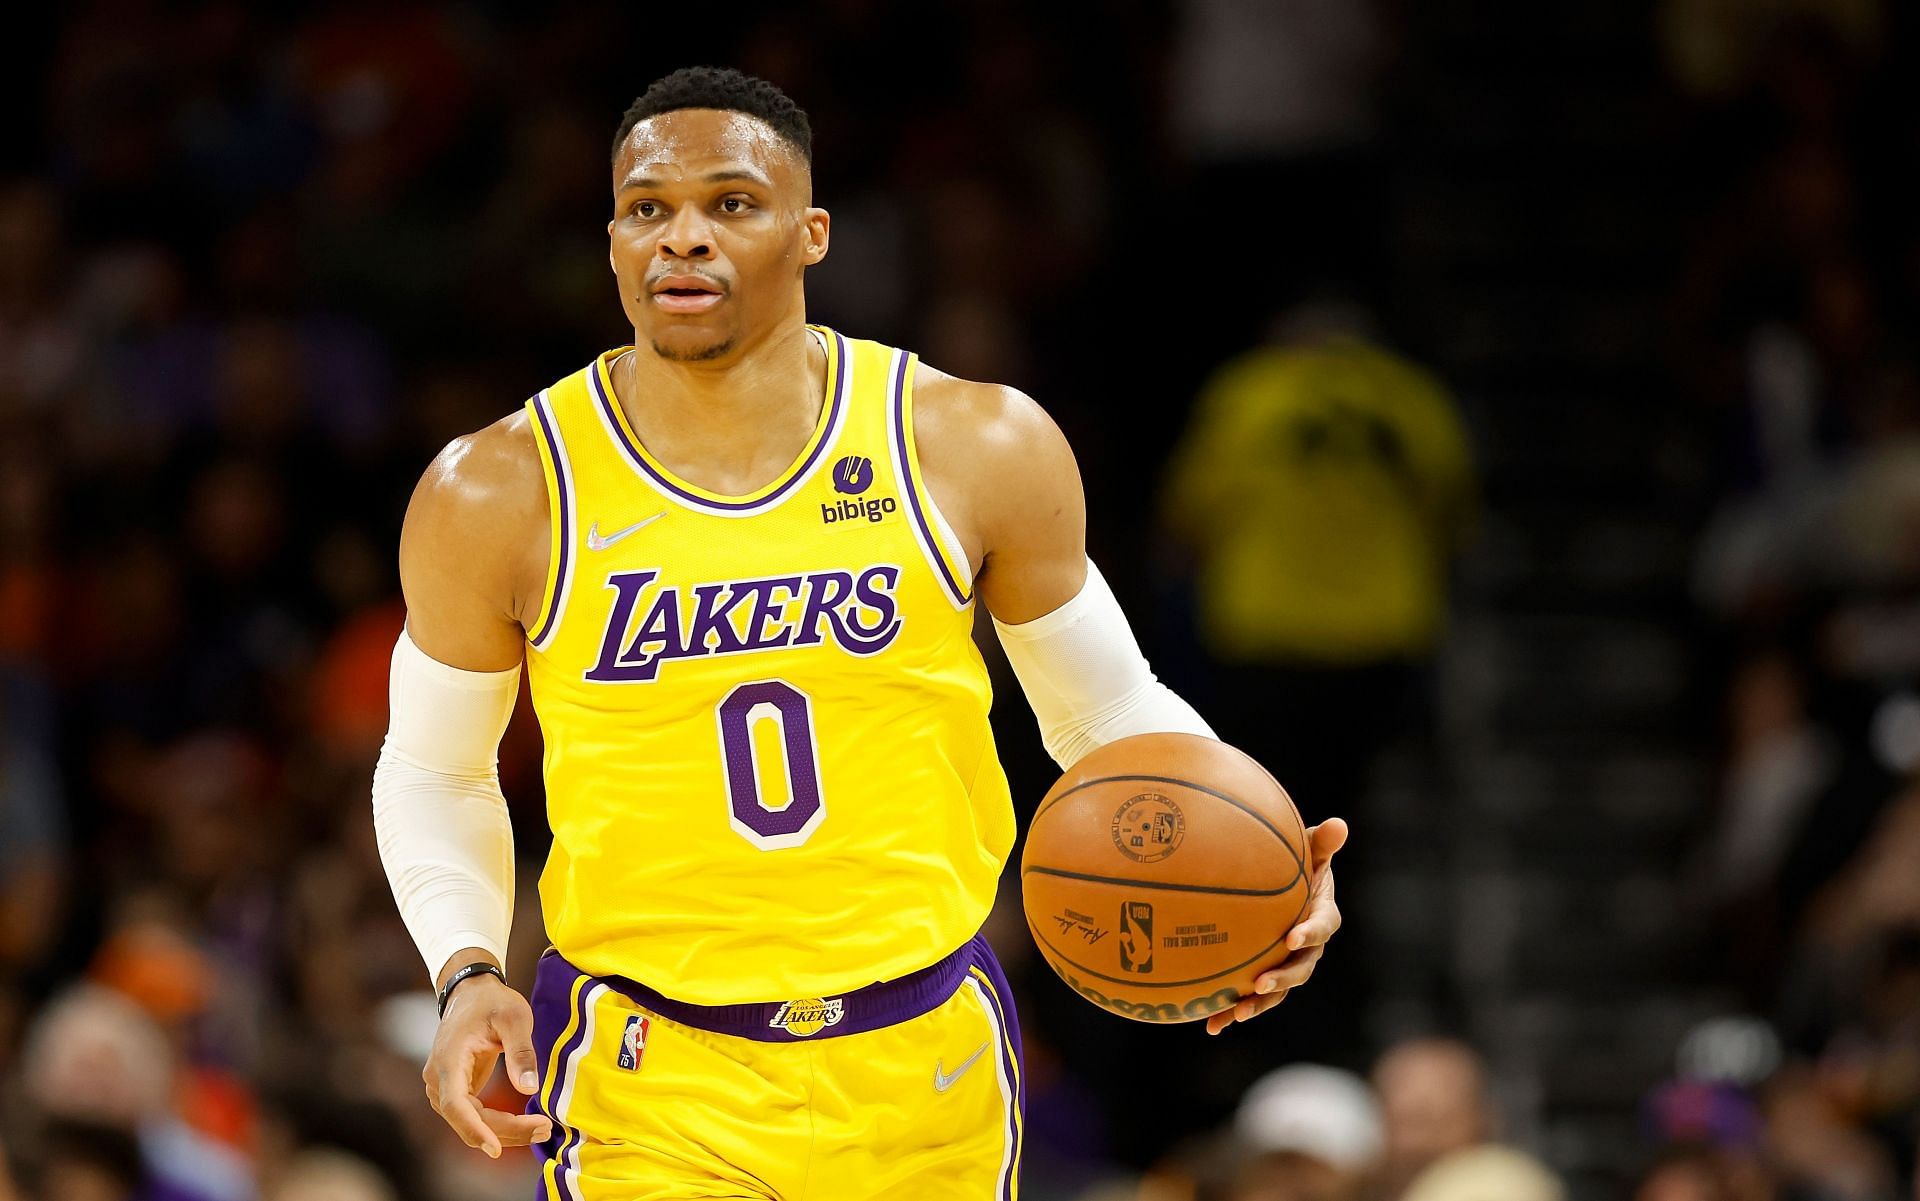 Russell Westbrook of the LA Lakers in the 2021-22 NBA season